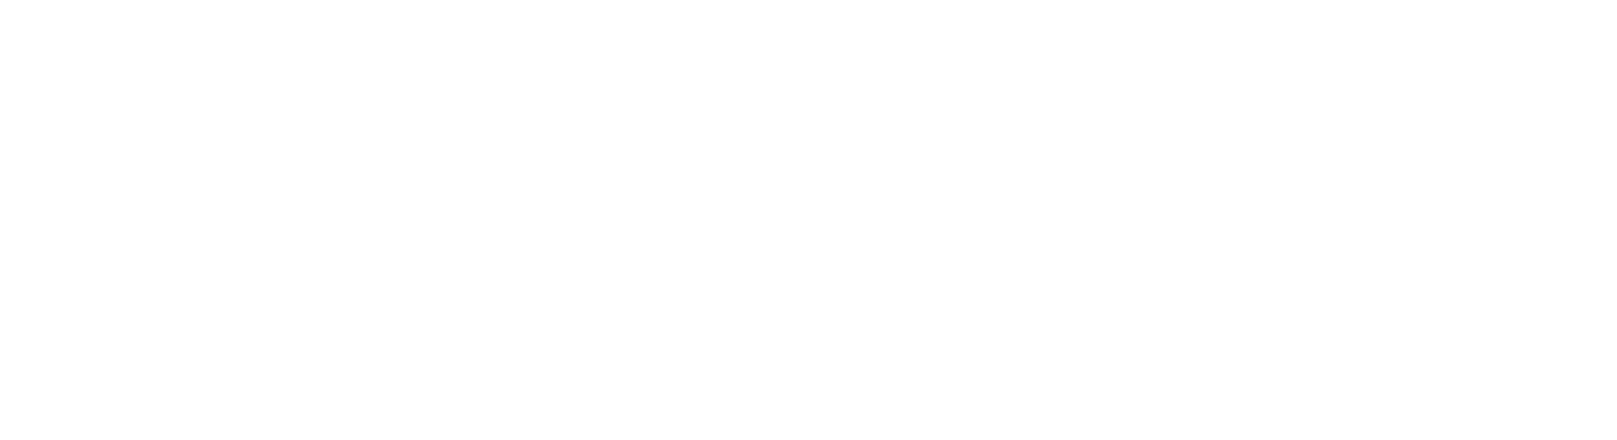 TPR Property Group